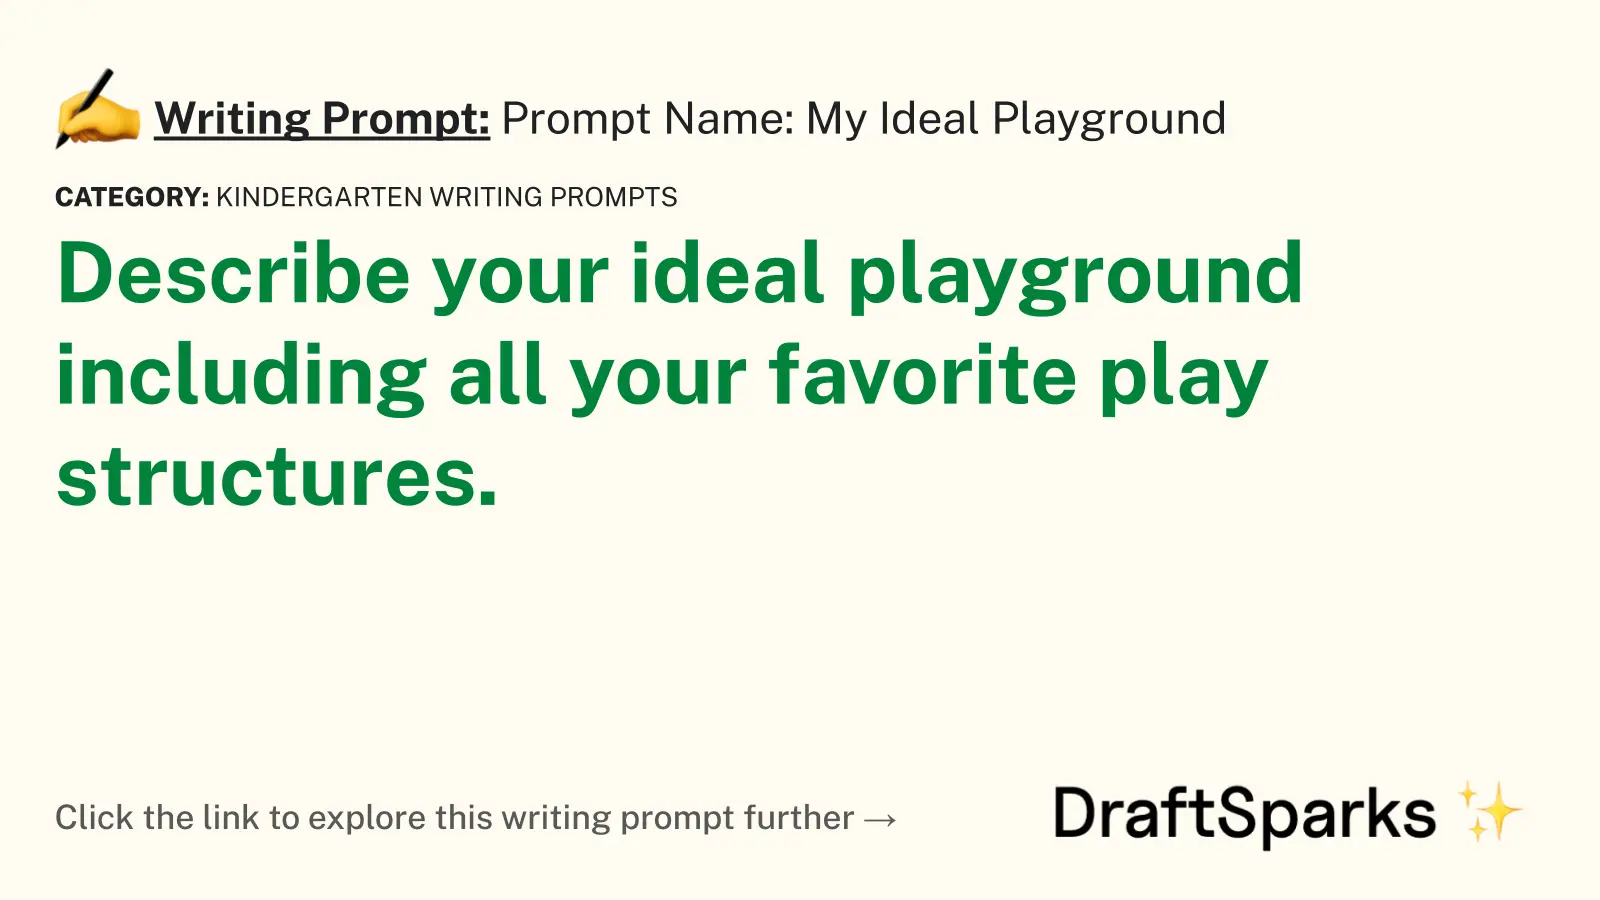 Prompt Name: My Ideal Playground